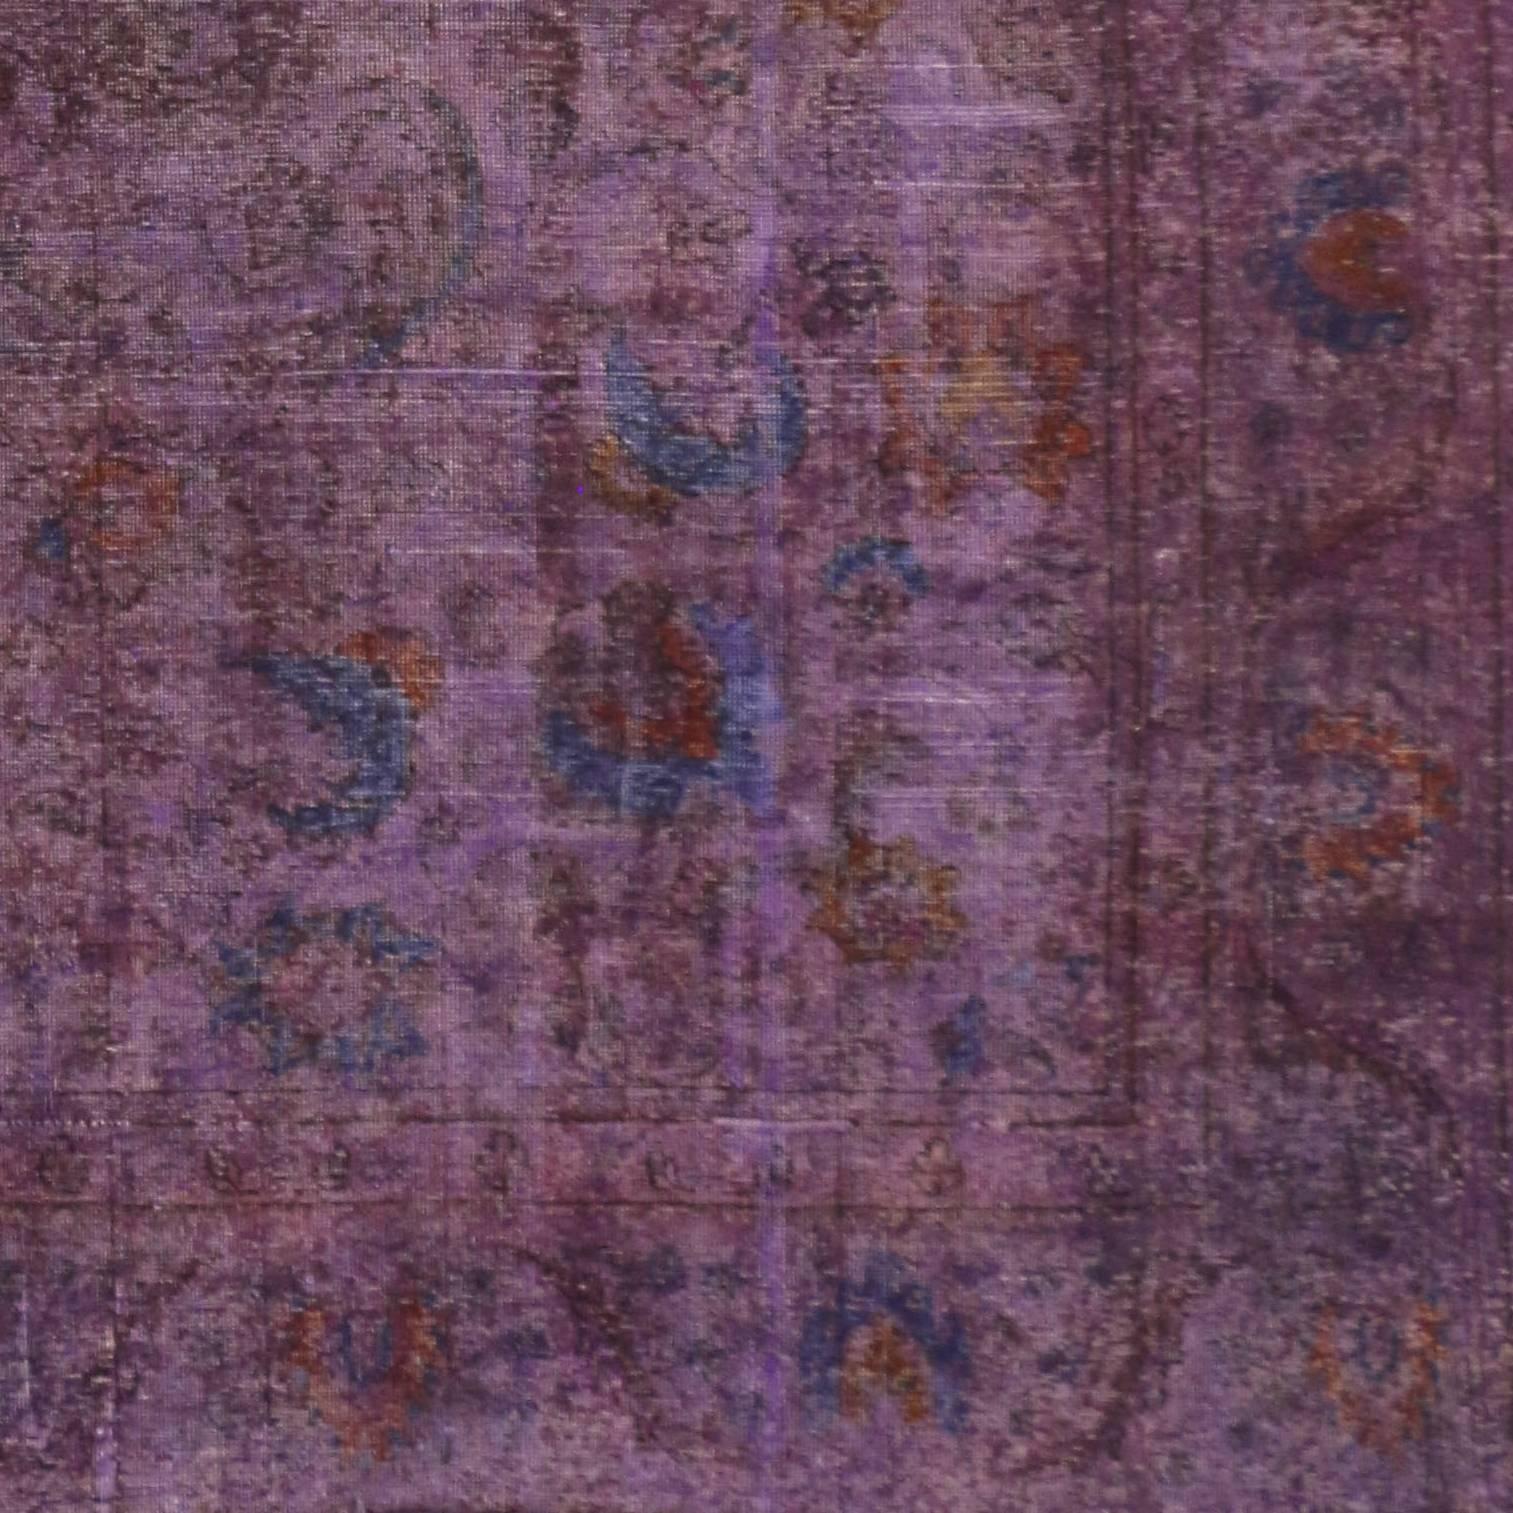 Hand-Knotted Distressed Overdyed Purple Persian Rug with PostModern Memphis Style